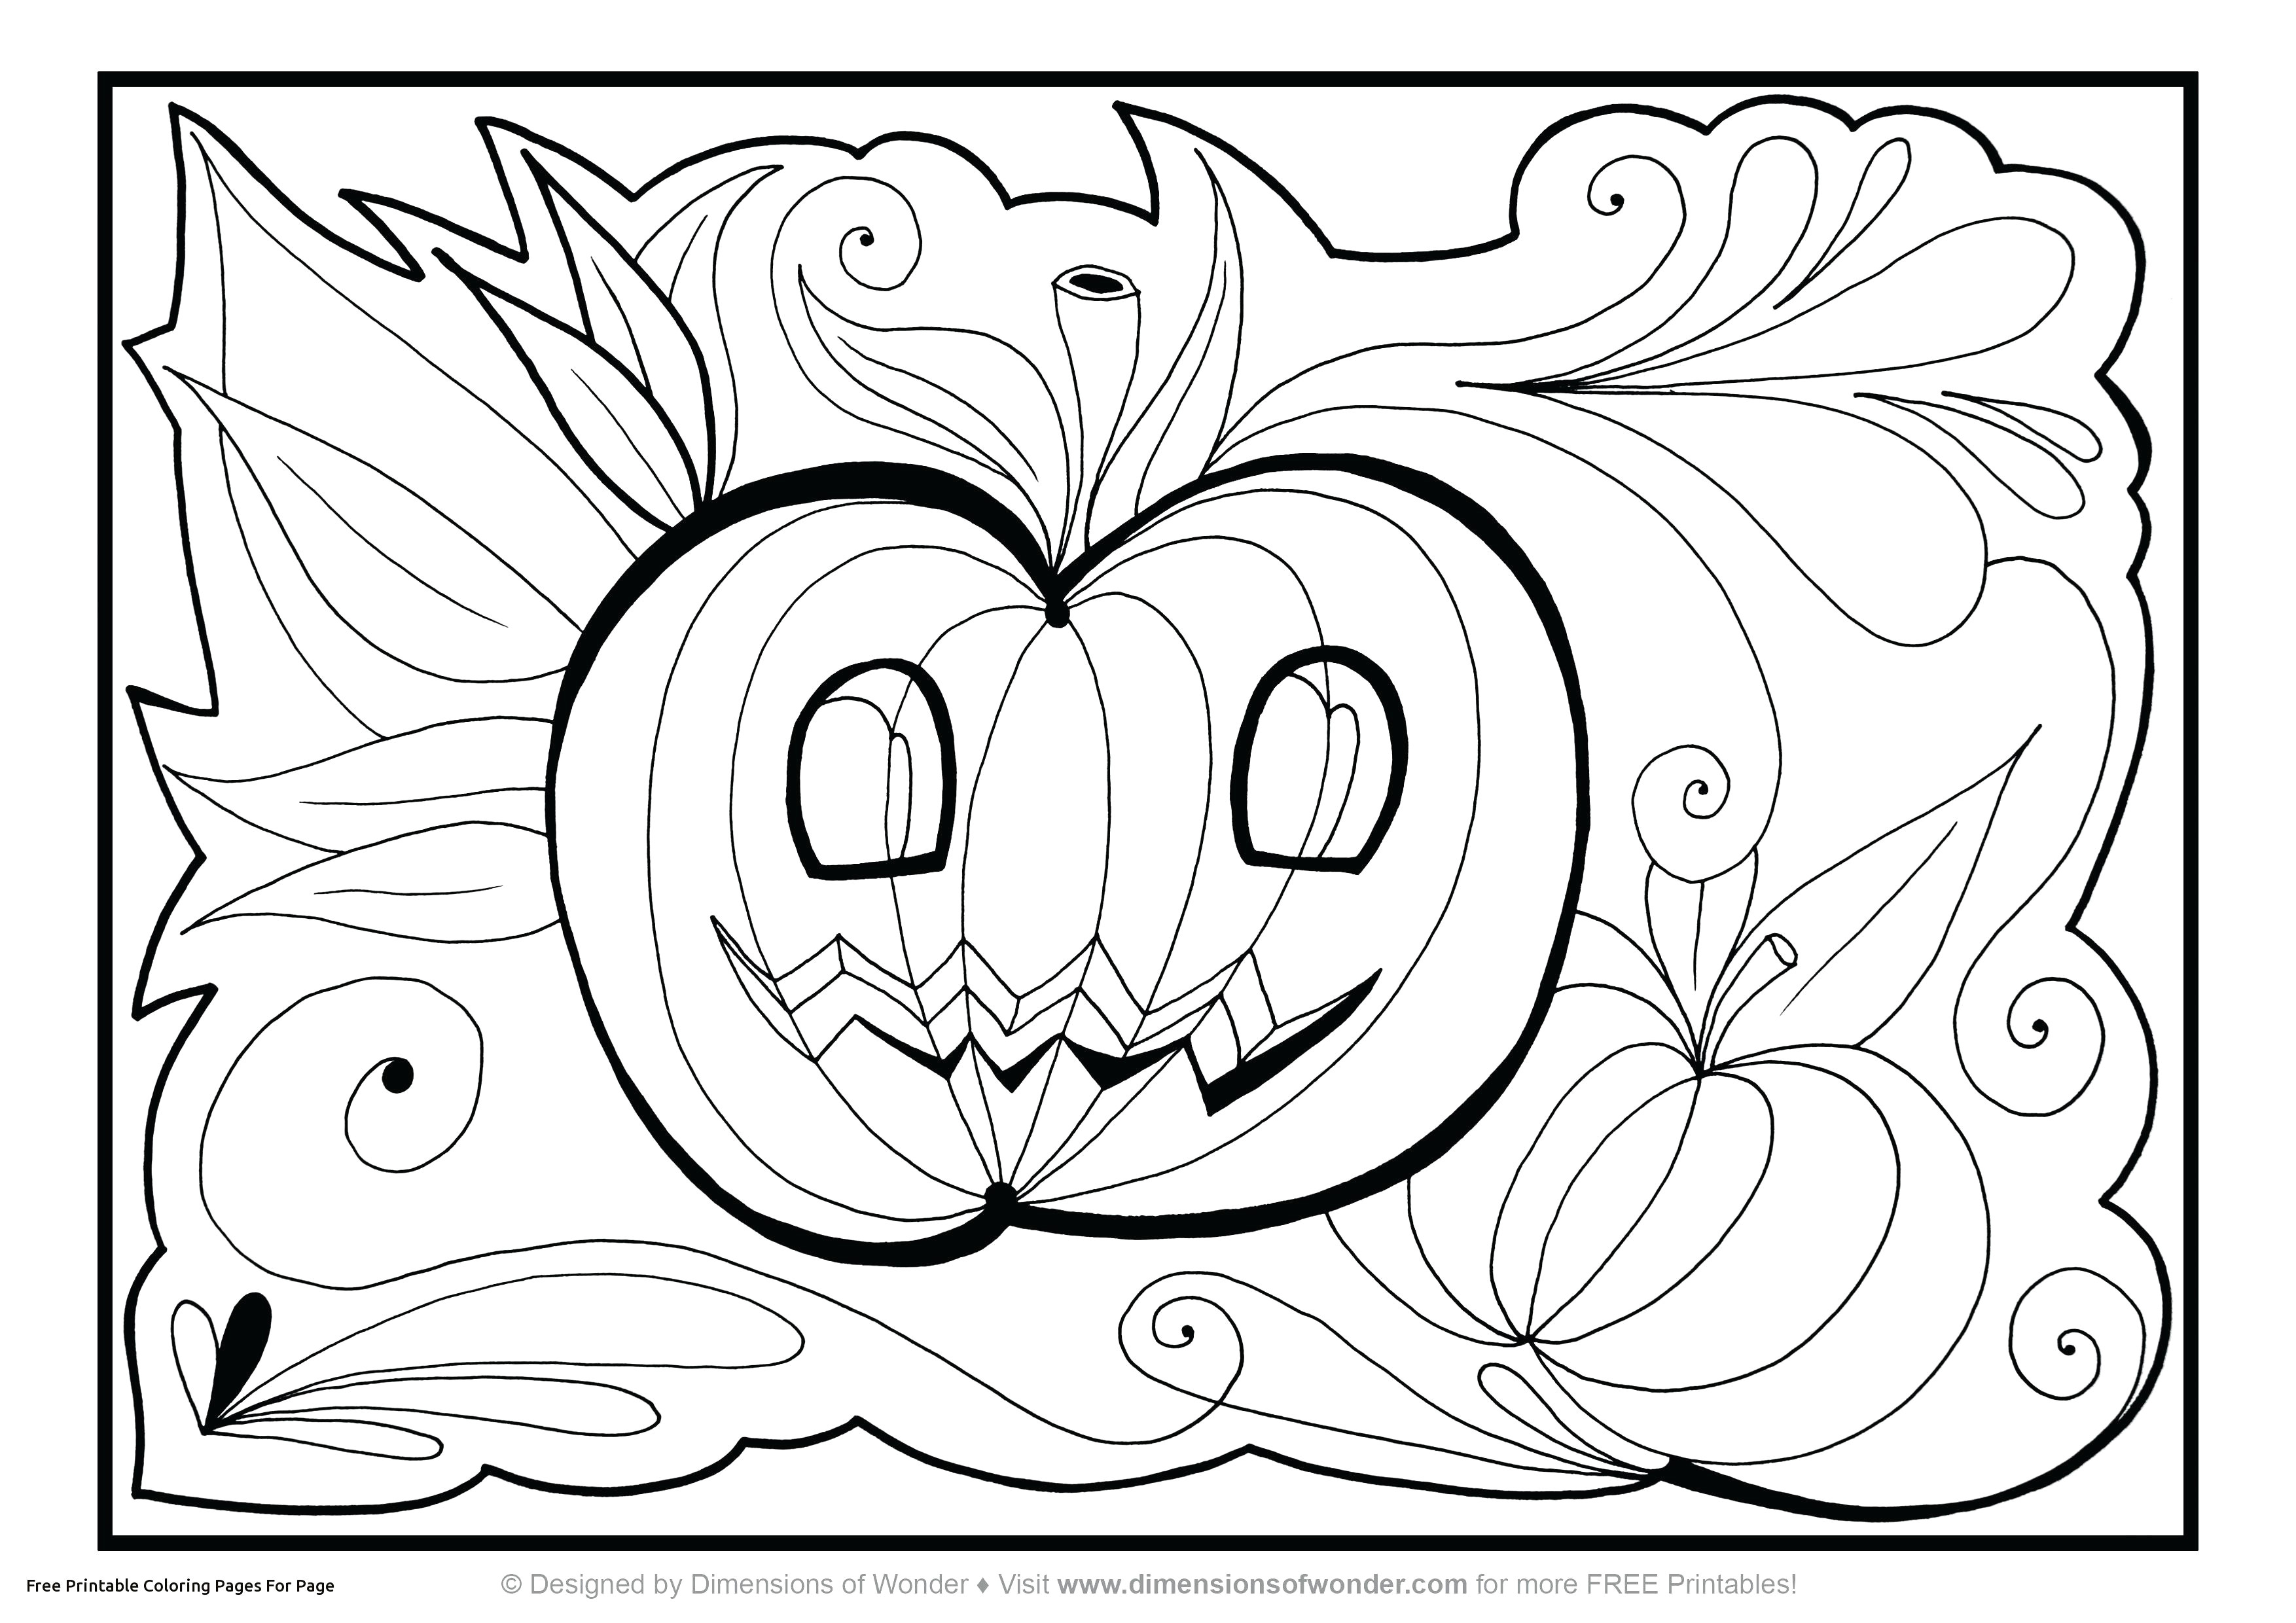 Easy Drawings In Color Easy to Draw Feather Feather Coloring Page Fresh Home Coloring Pages